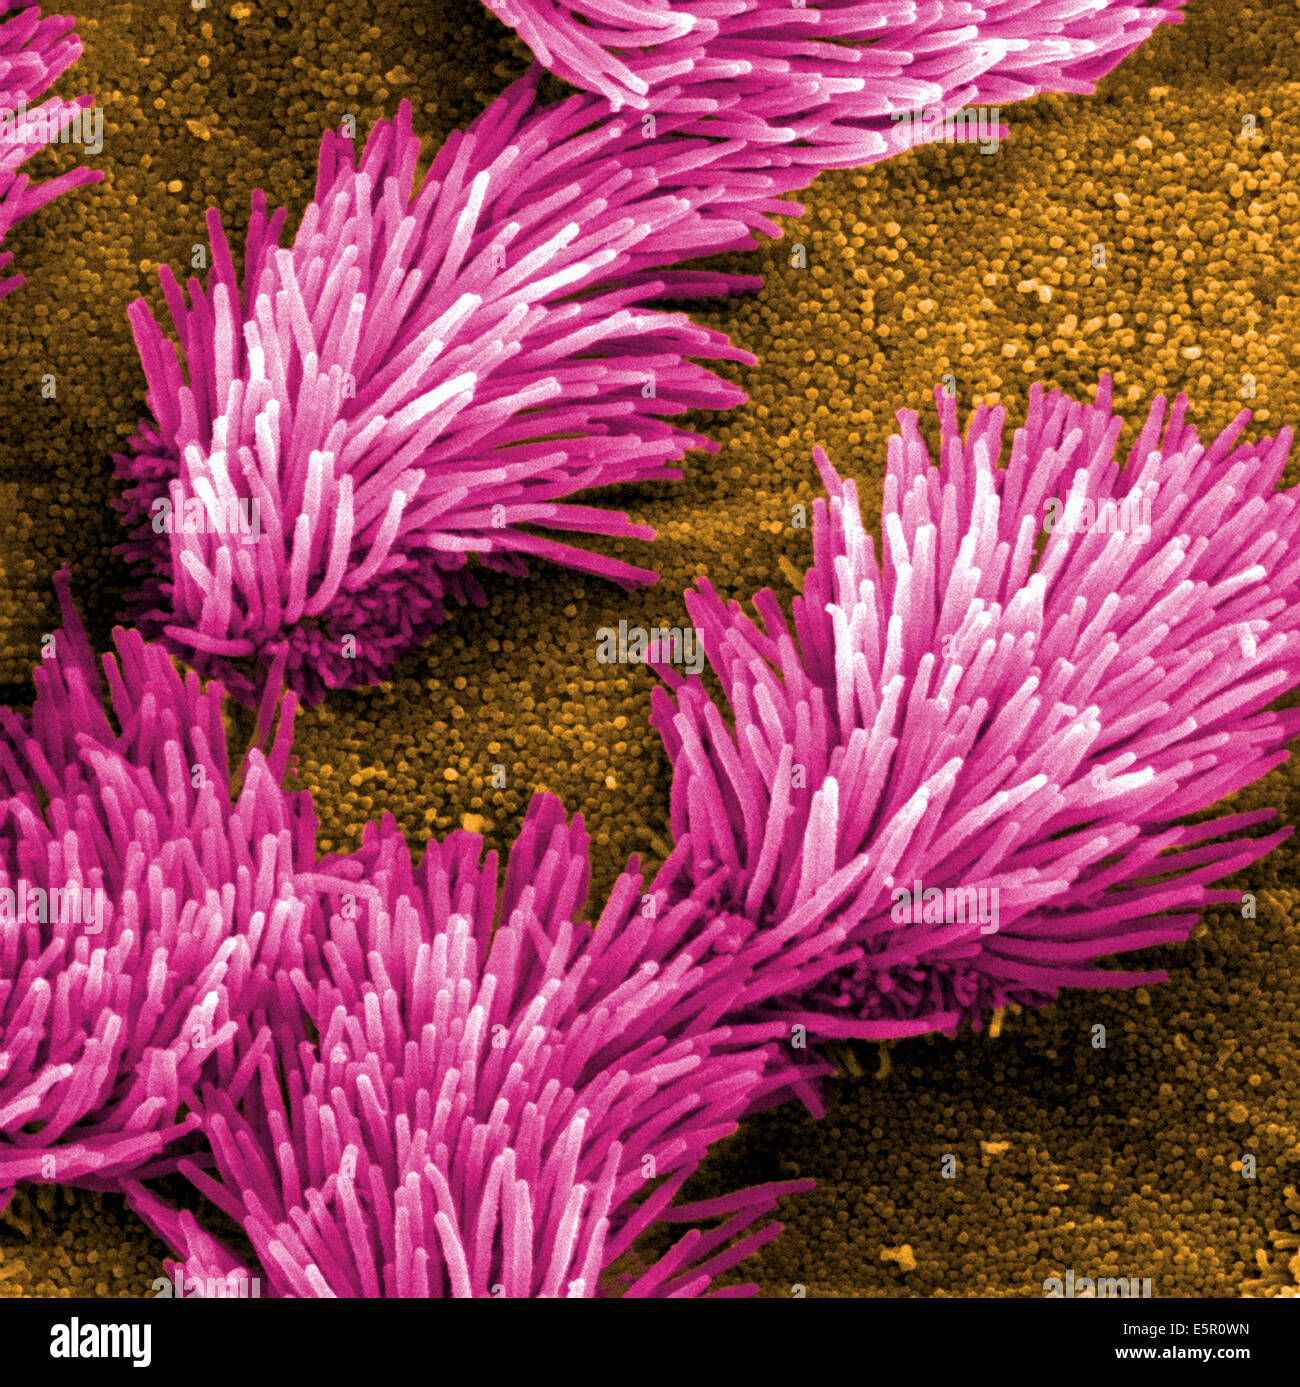 Scanning electron micrograph (SEM) of the lung trachea epithelium which consists of ciliated cells and non-ciliated cells. Stock Photo